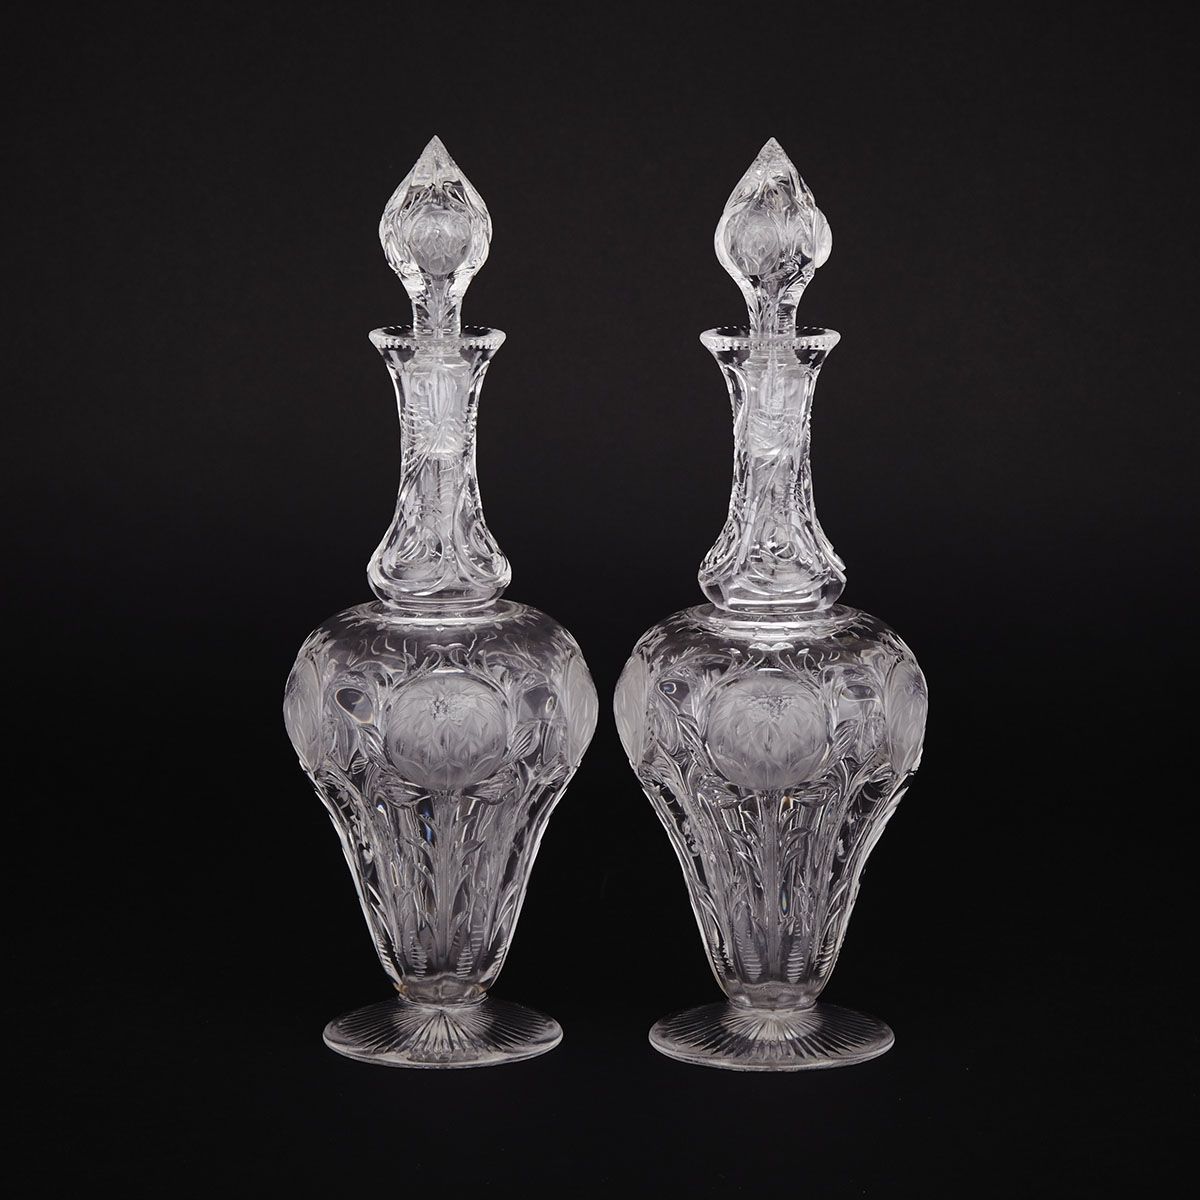 Pair of English ‘Rock Crystal’ Cut Glass Decanters, early 20th century